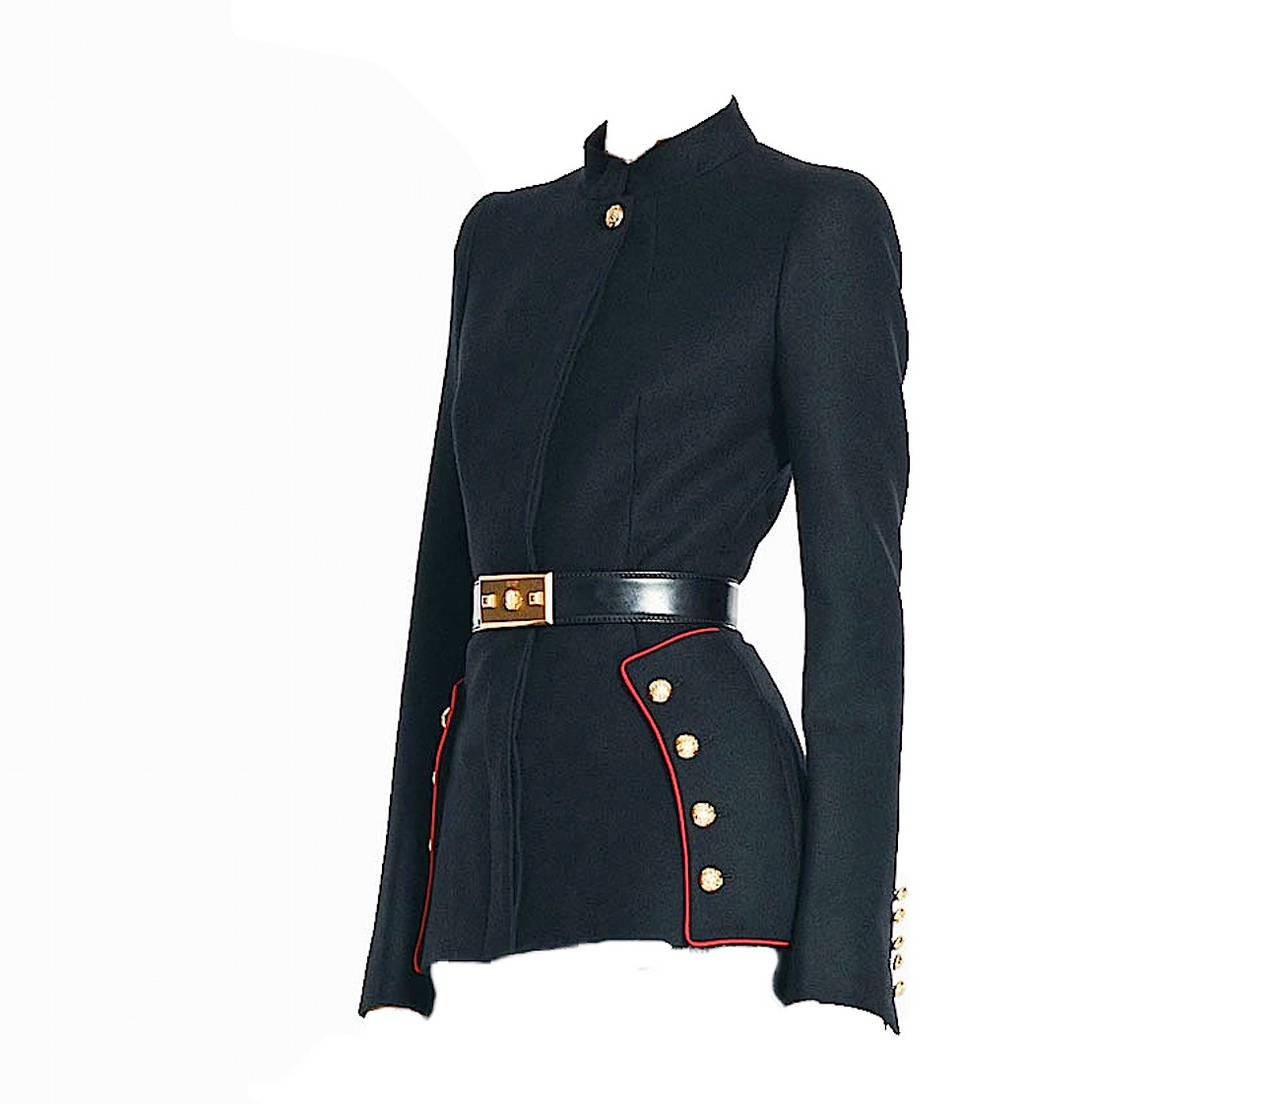 From the Autumn/Winter 2011 Collection, this runway military inspired jacket was designed by Sarah Burton for Alexander McQueen. Inspired by Manet, the military style black wool jacket features red braided embellishments and four gold-tone buttons